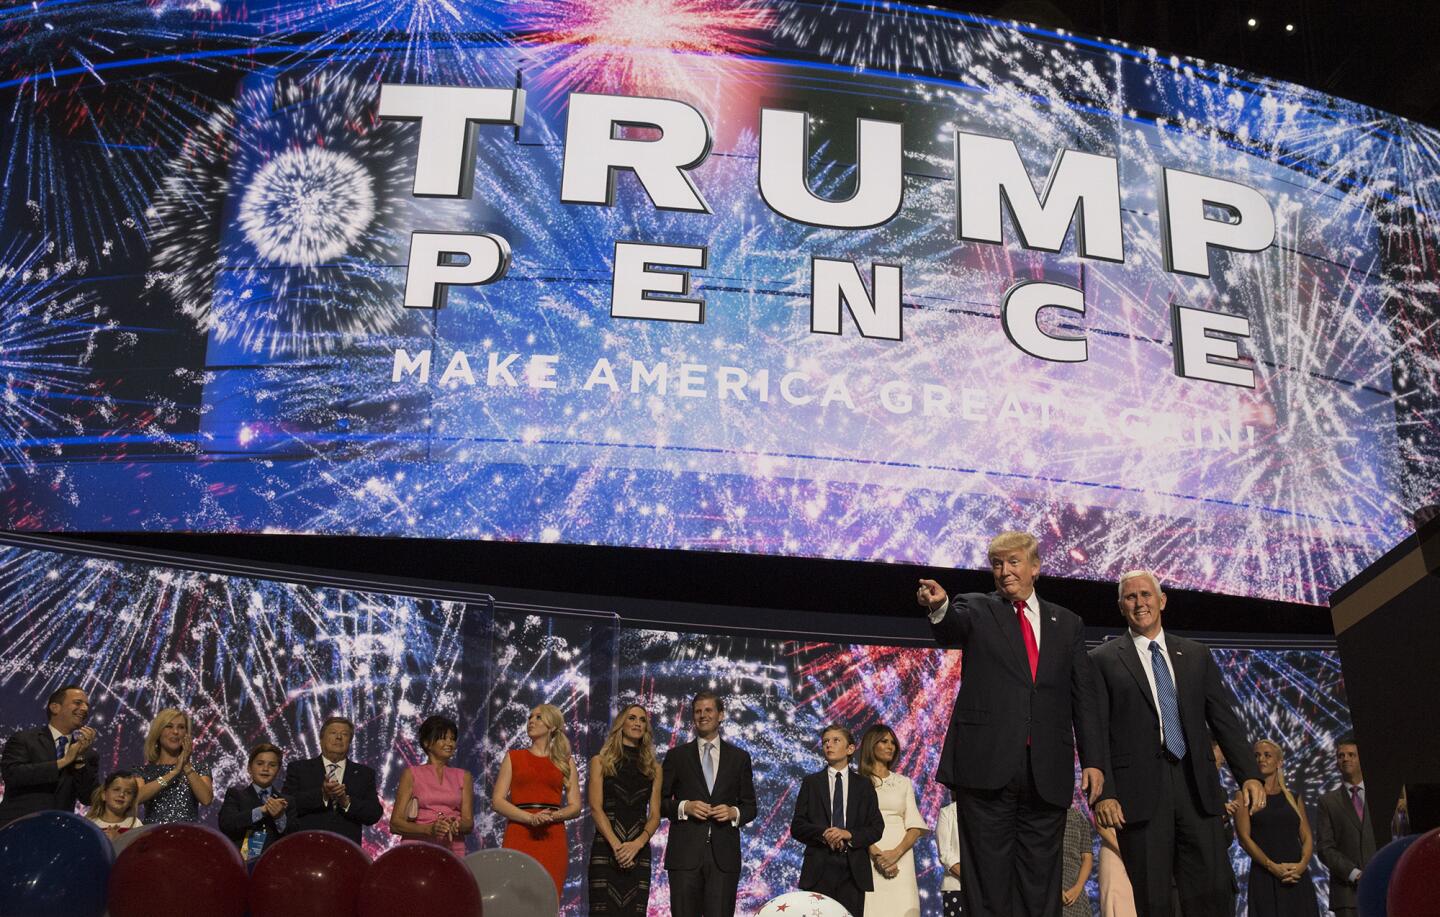 With their families behind them, Republican Presidential nominee Donald Trump and Vice Presidential nominee Mike Pence are cheered on by delegates at the close of the final day of the 2016 Republican National Convention in Cleveland.